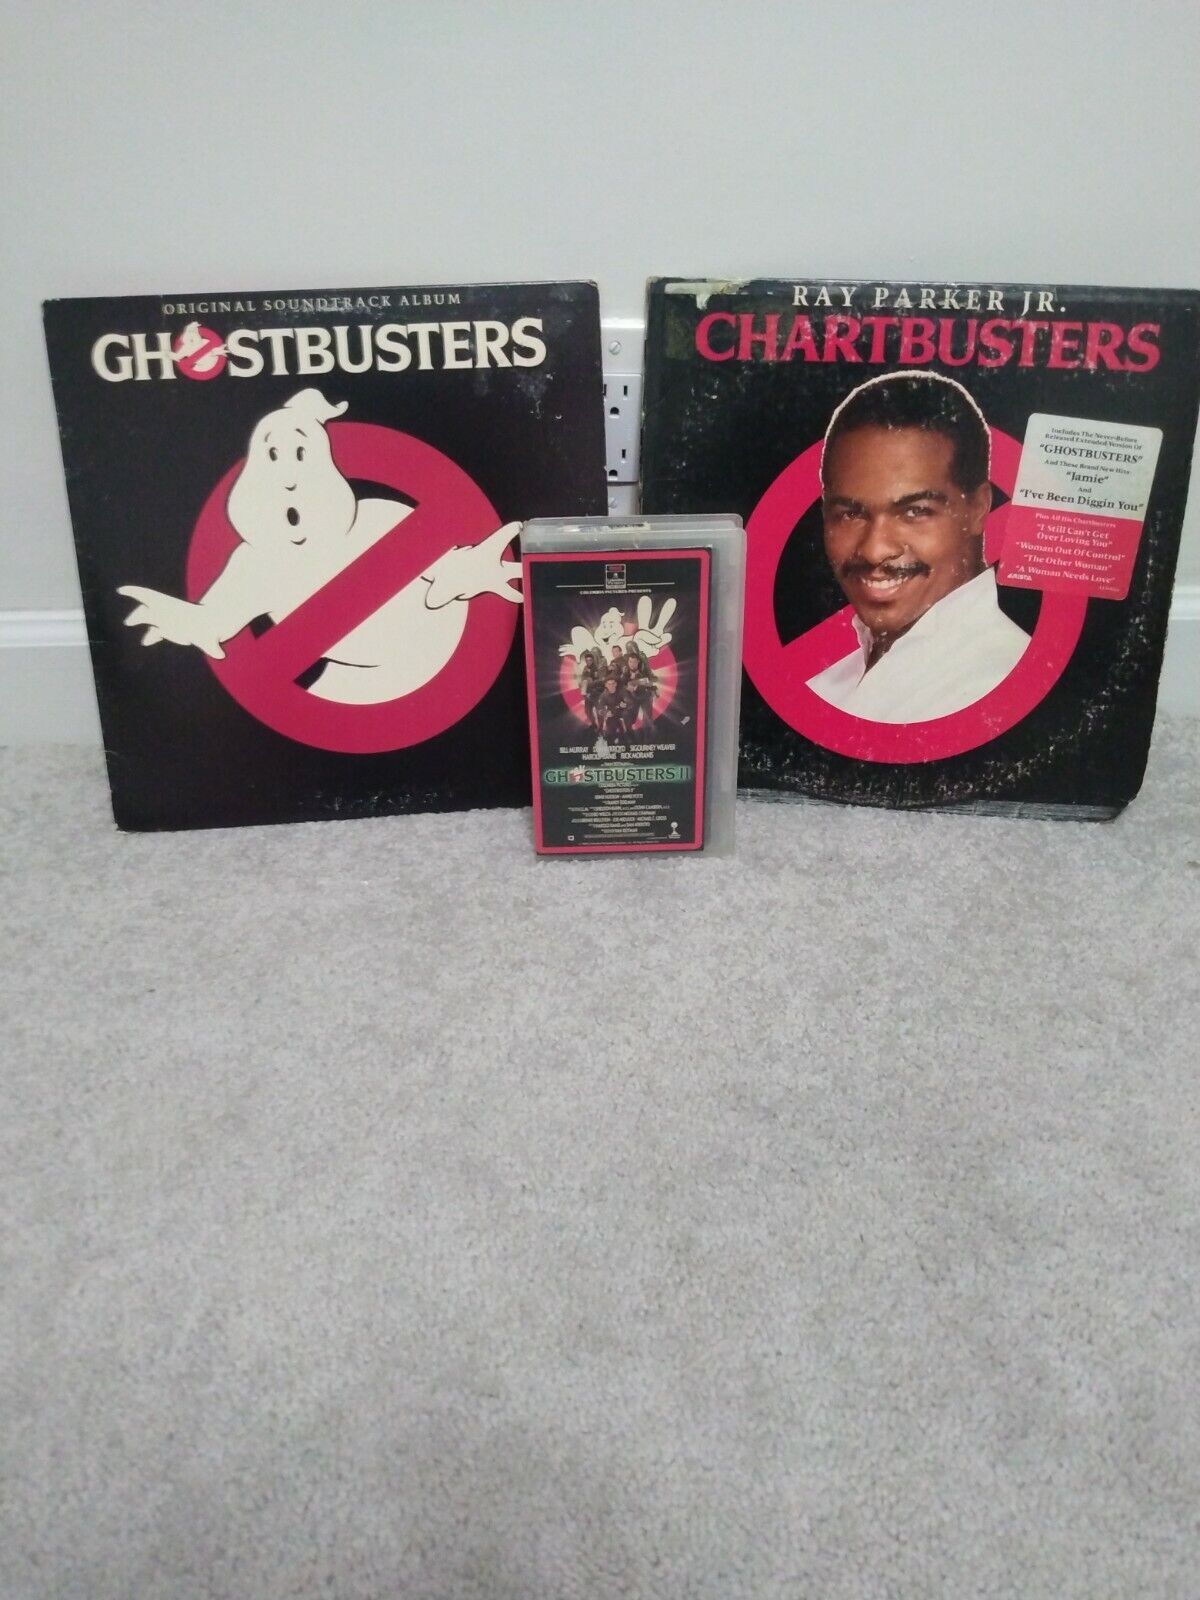 Ghostbusters Vinyl Records 1984 Ray Parker Jr. & Ghostbusters II VHS Lot